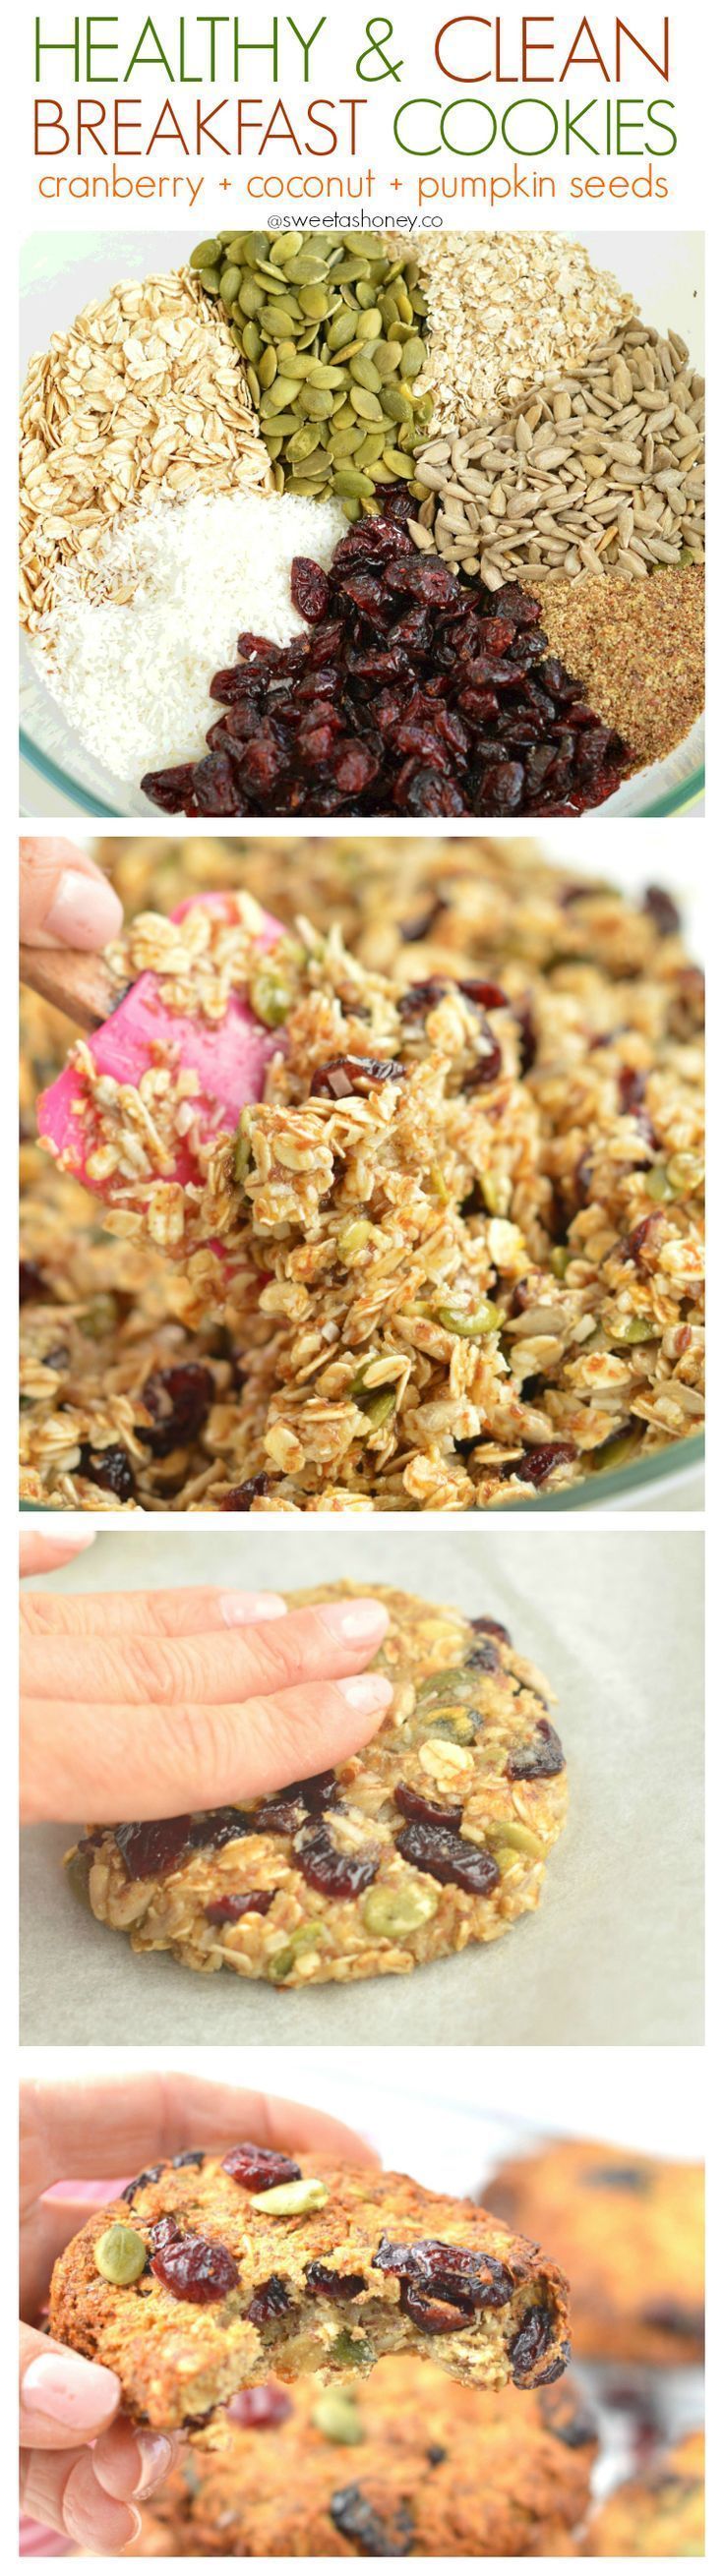 Clean Oatmeal Cookies | Easy cranberry coconut cookies | dairy free gluten free Clean breakfast cookies for an healthy grab and go